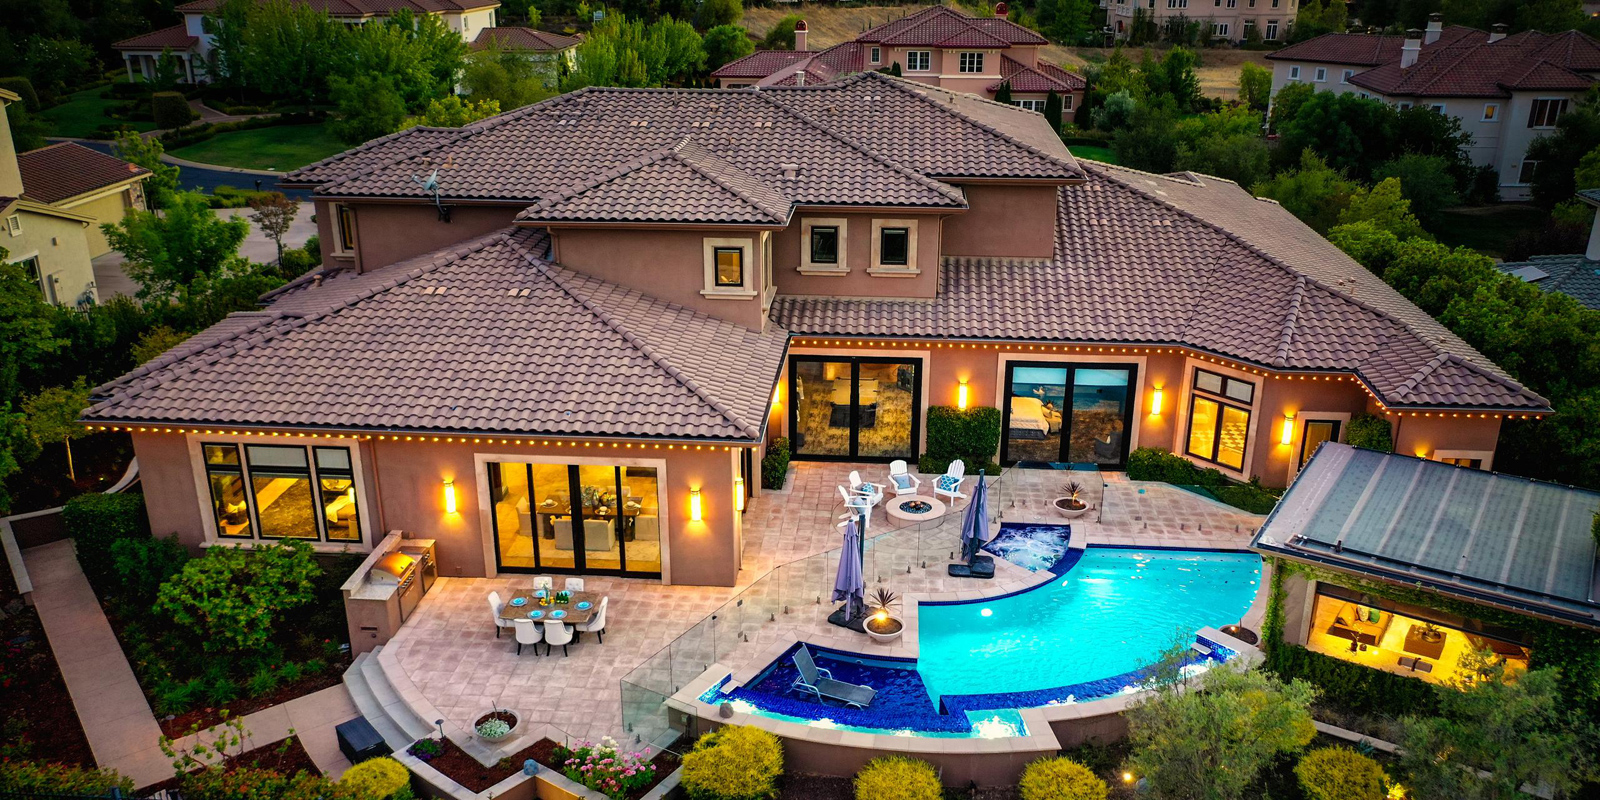 A luxury homes for sale with pool in Pleasanton, CA